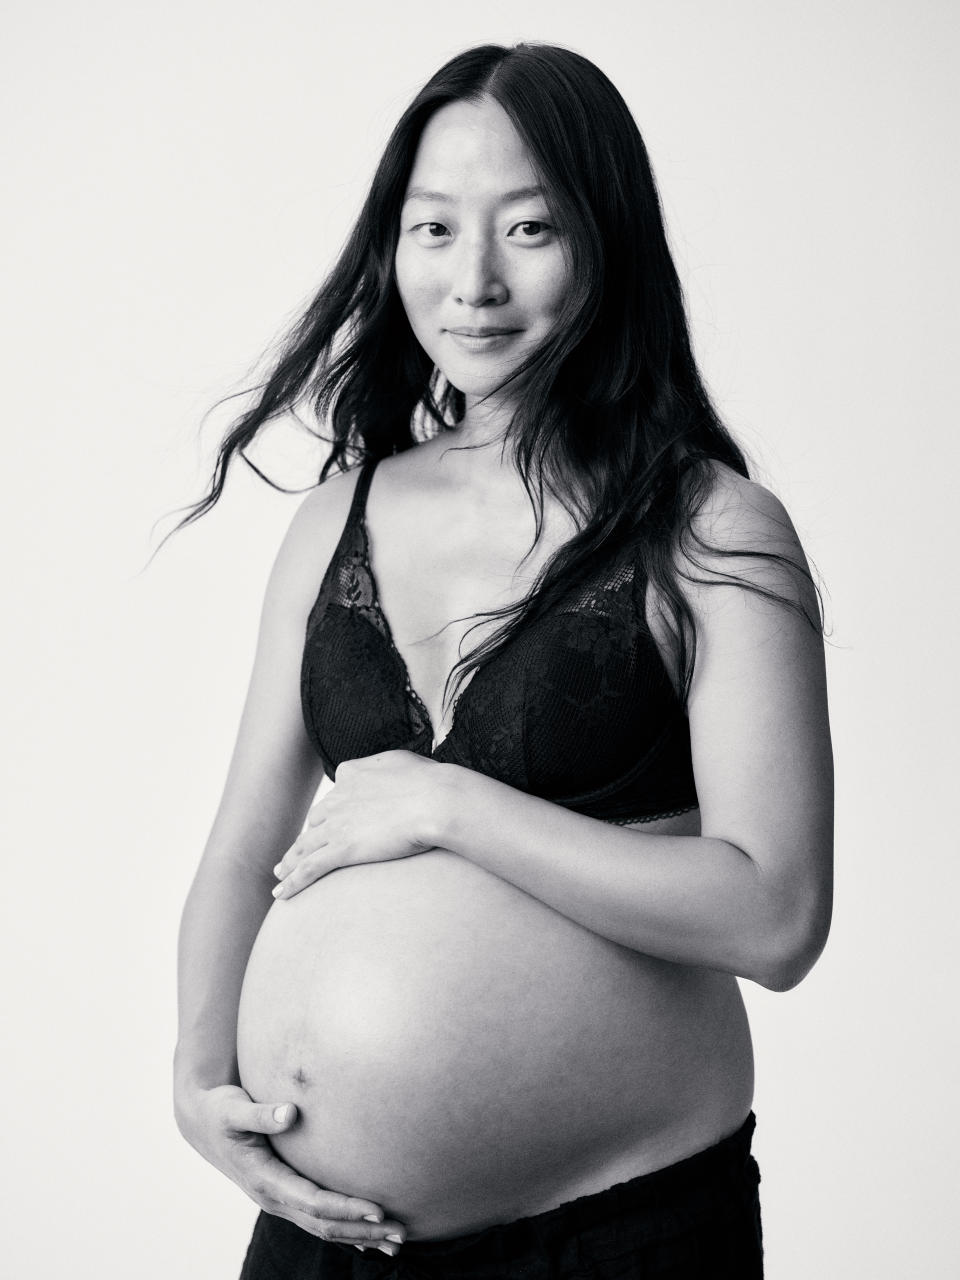 Victoria’s Secret’s marketing now includes images of pregnant women. - Credit: Courtesy Photo